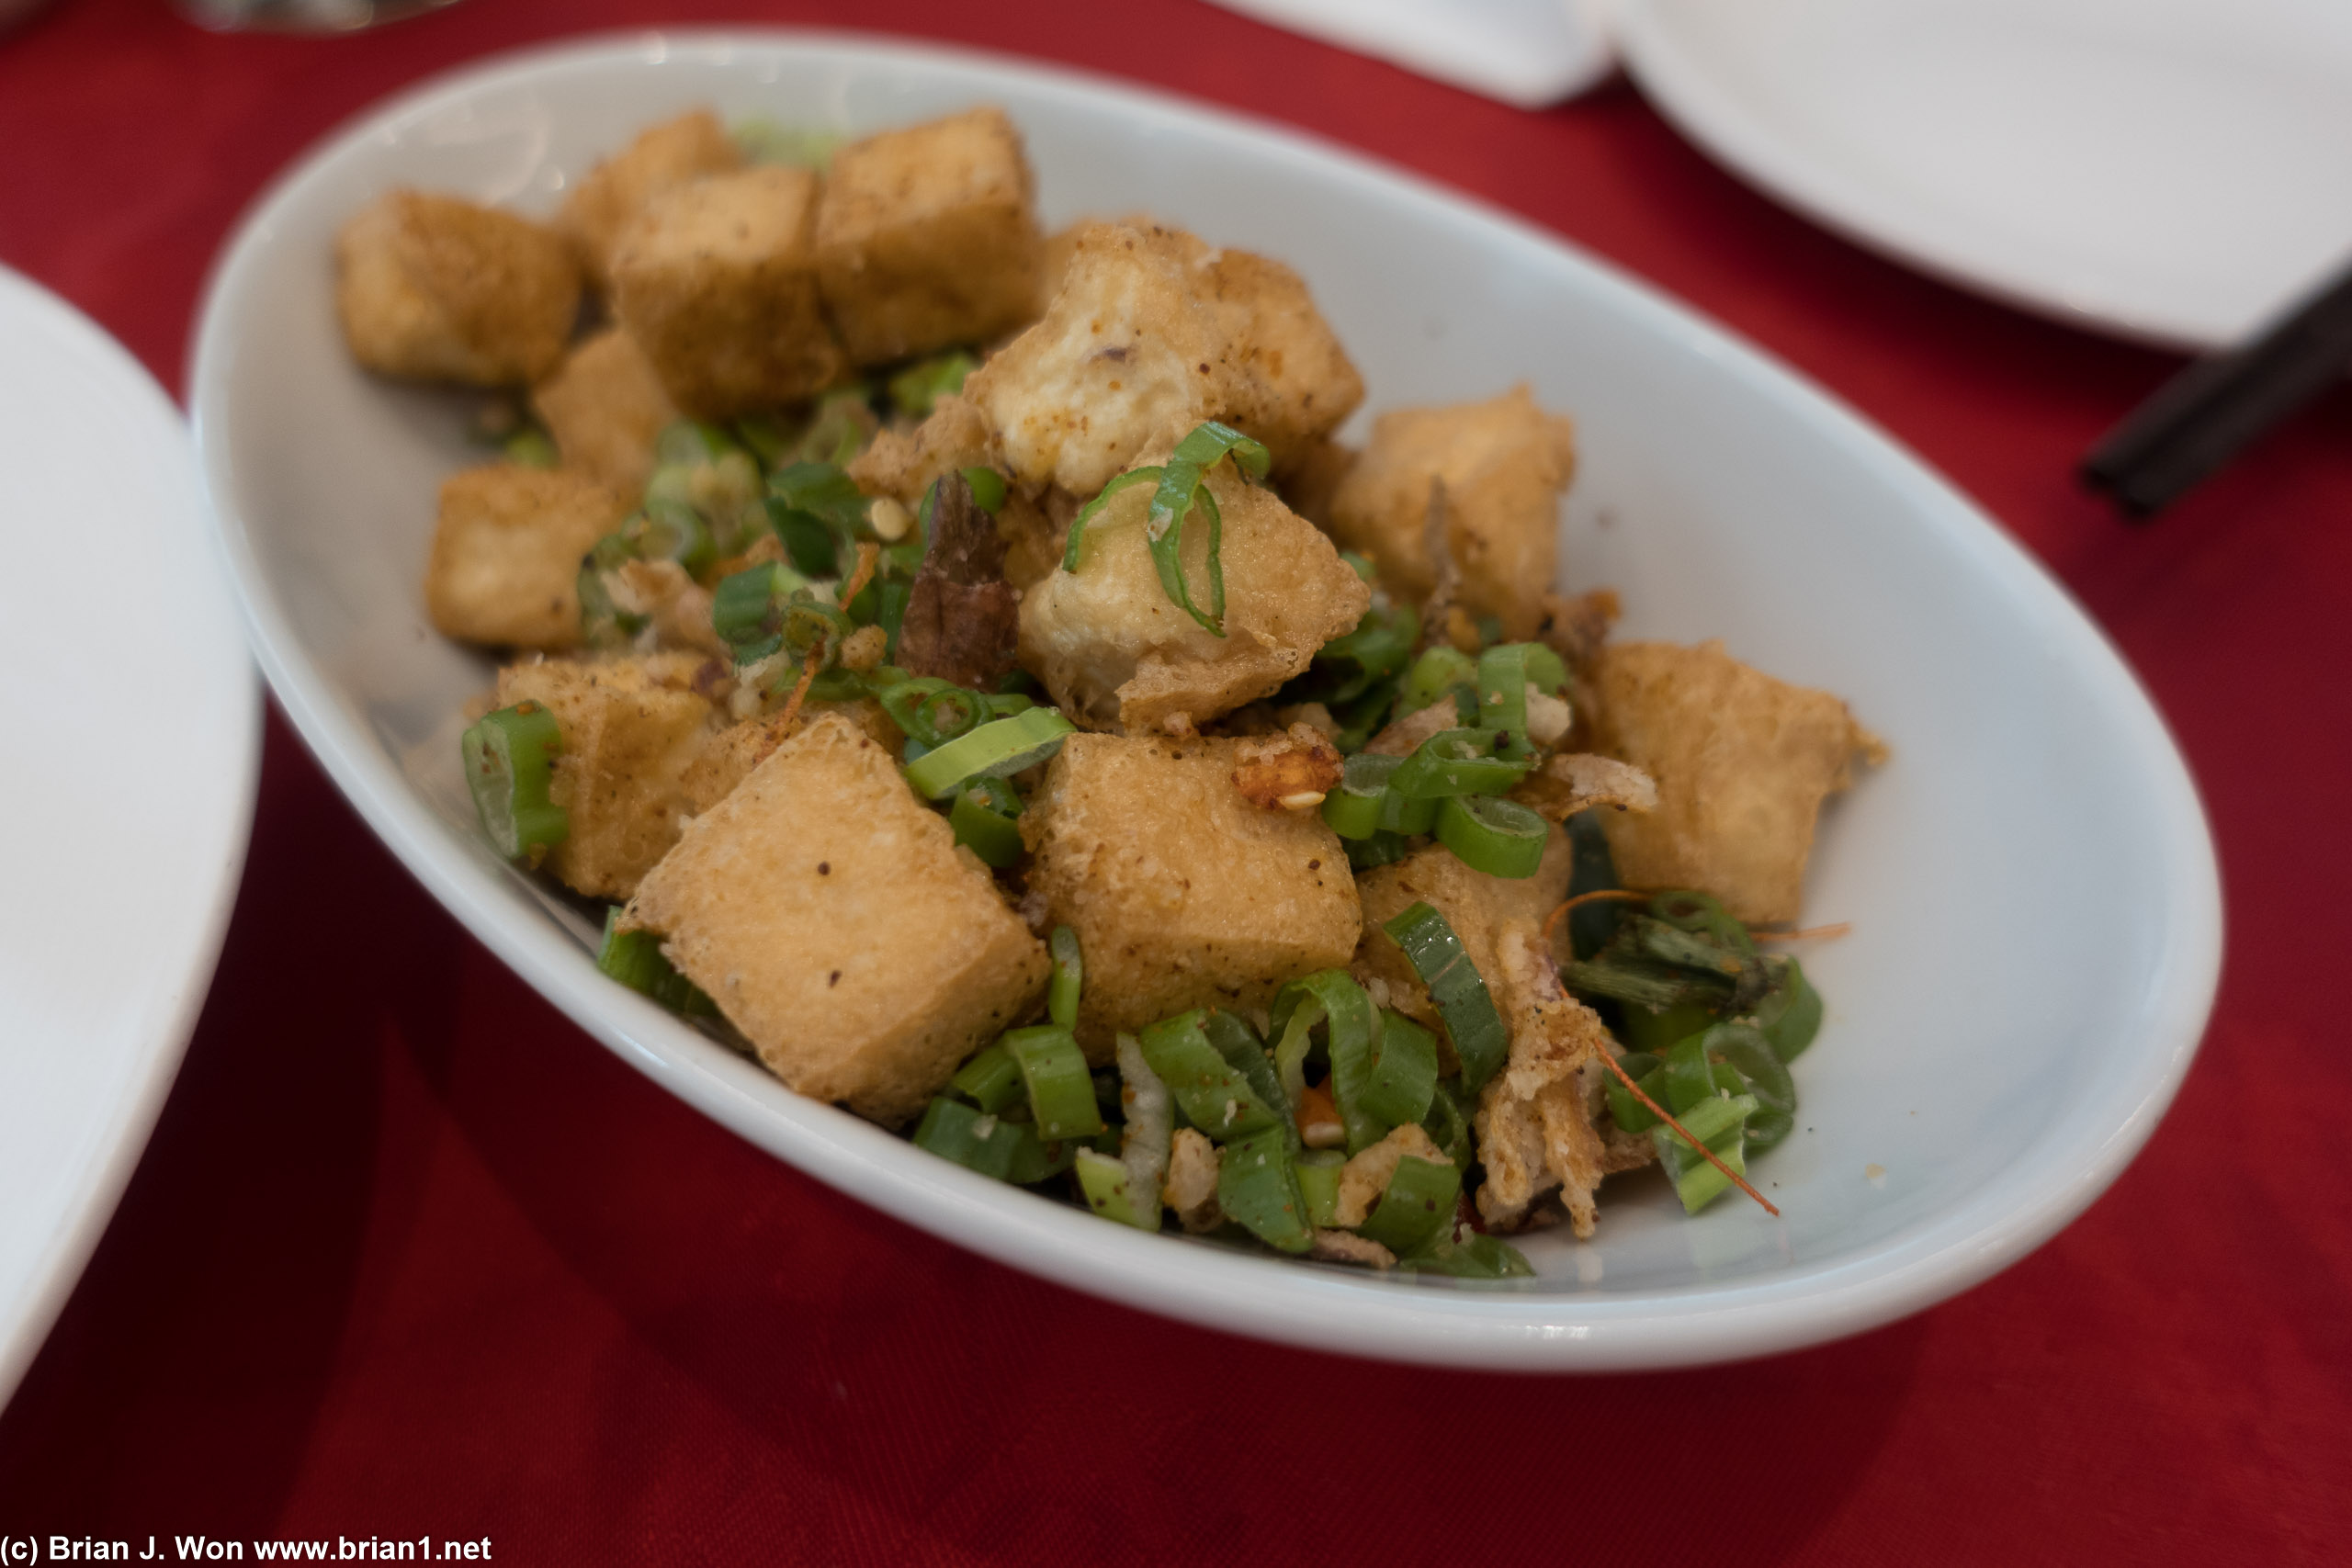 Deep fried tofu was meh. Nicely crispy and just salty enough, but still not interesting.